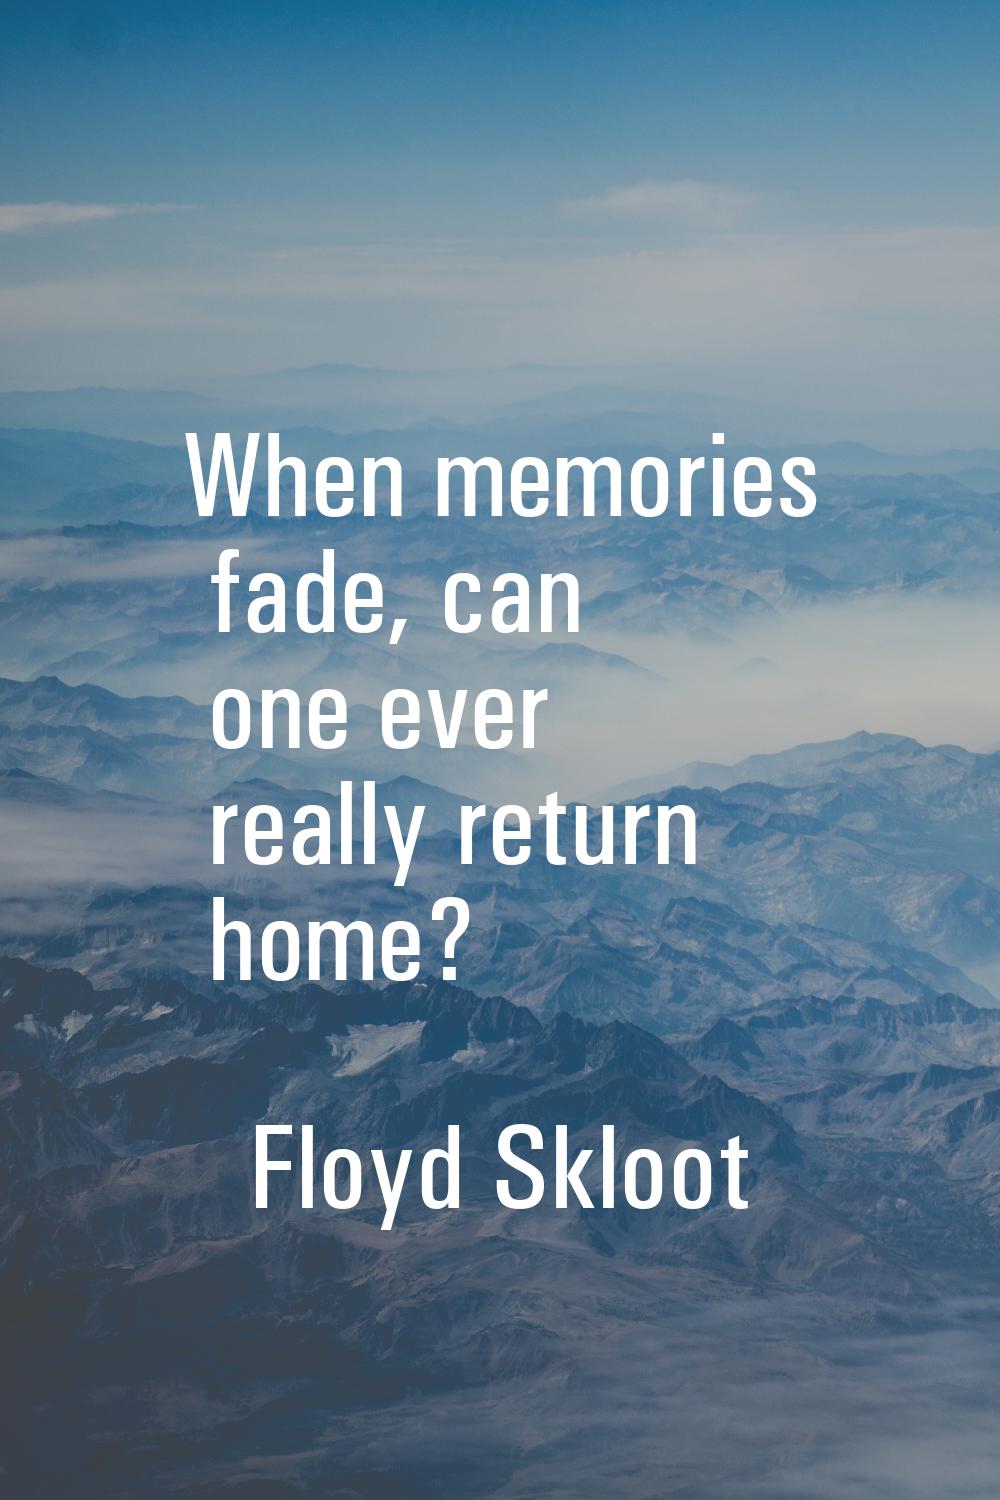 When memories fade, can one ever really return home?